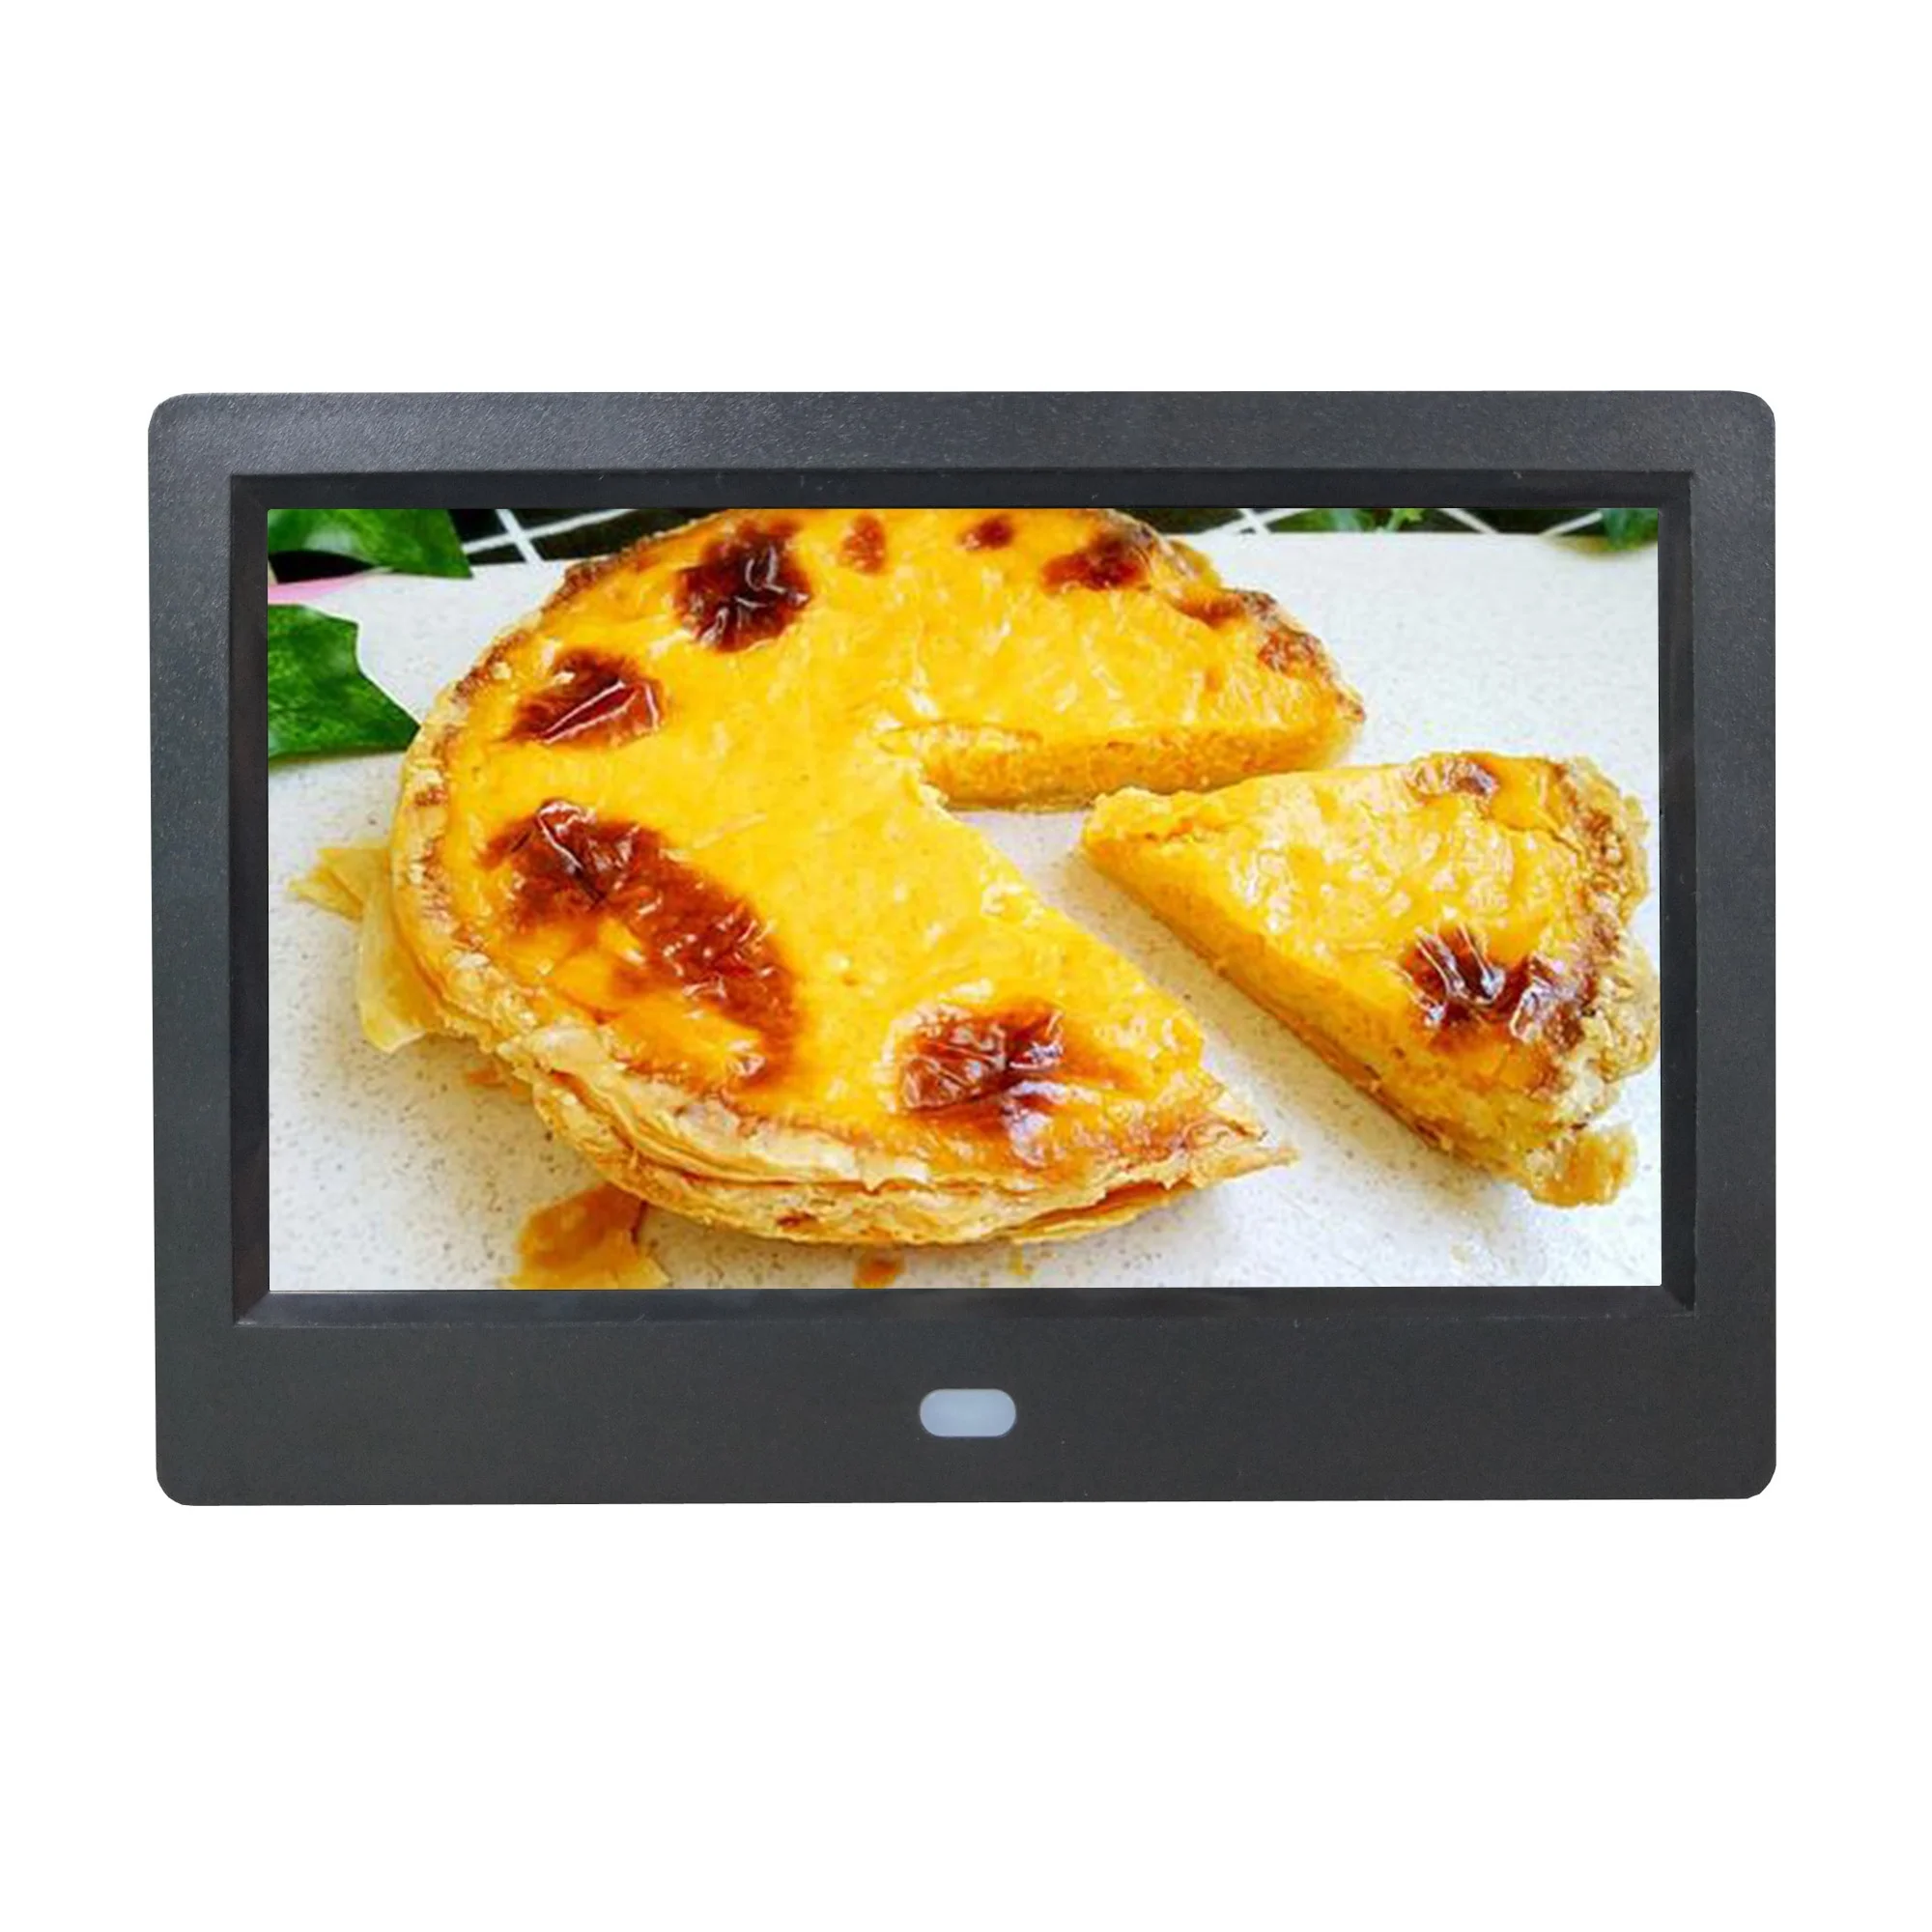 7 inch new design high resolution 1024X600 play picture video loop playback digital photo frame digital picture frame